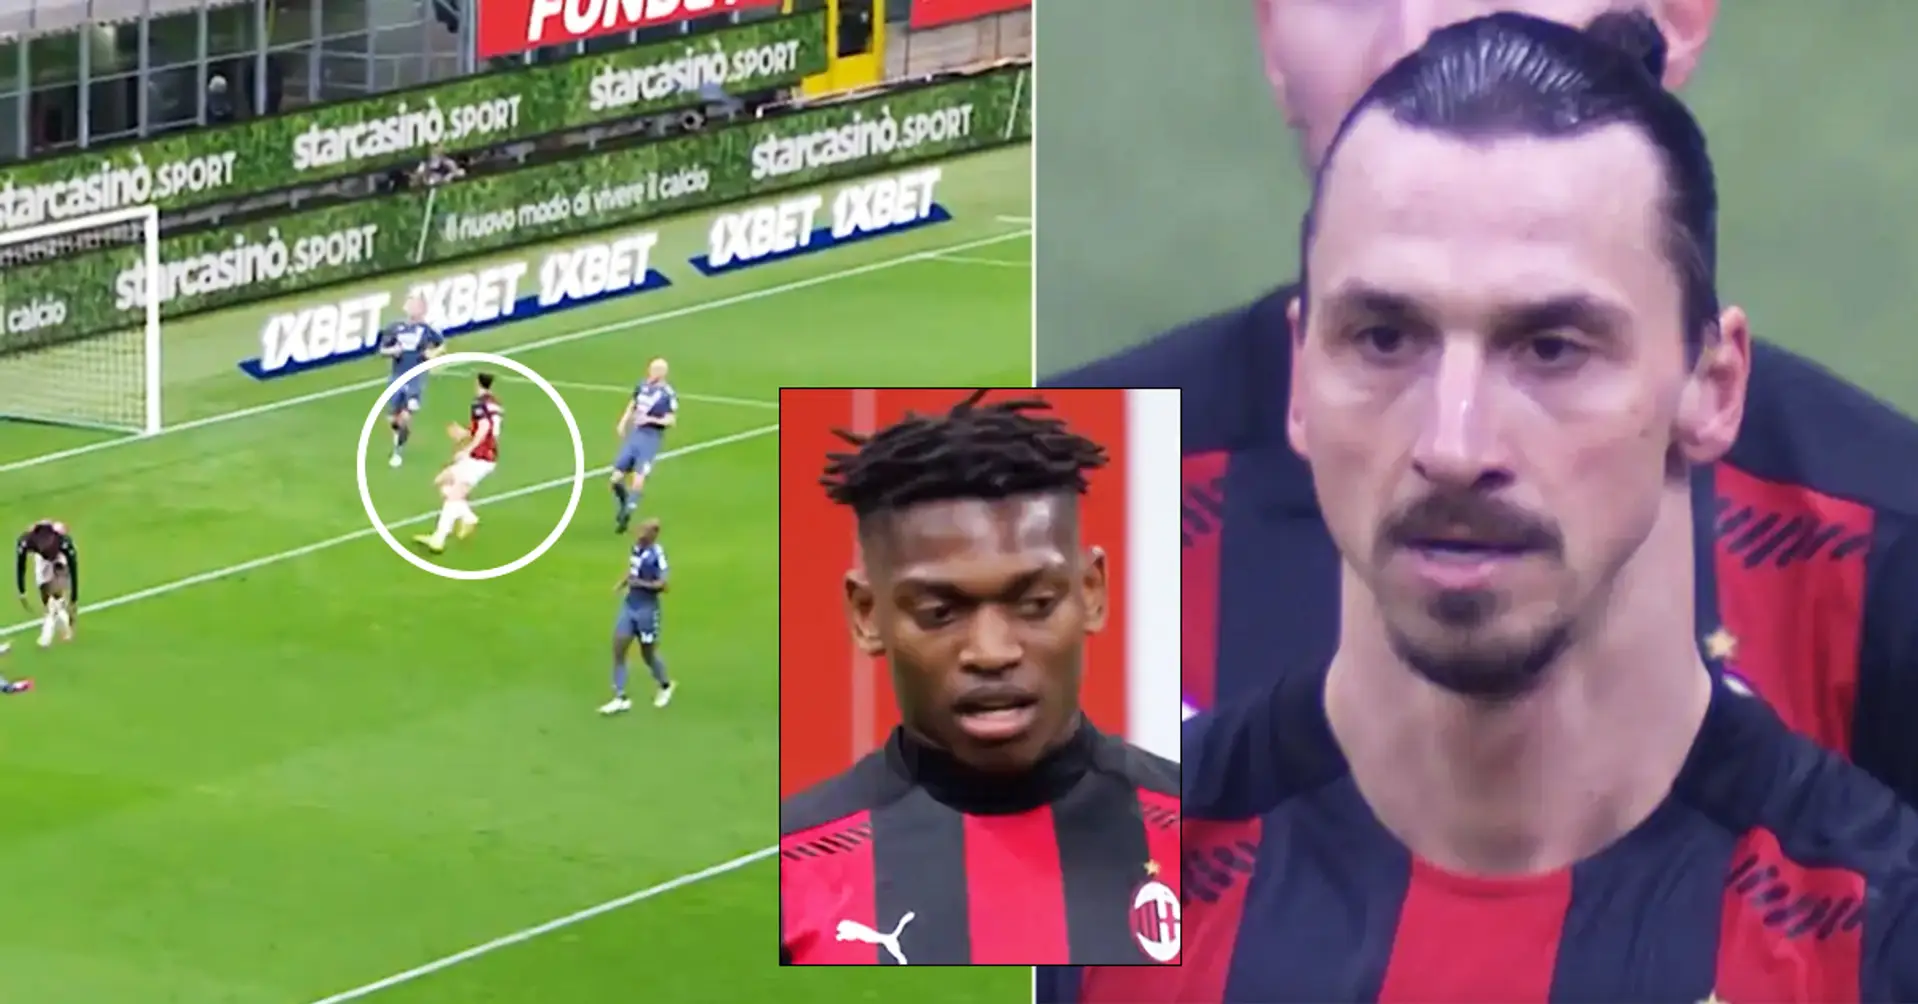 'I don't f** understand you'. Zlatan Ibrahimovic screams at teammate during game, mics pick up his words